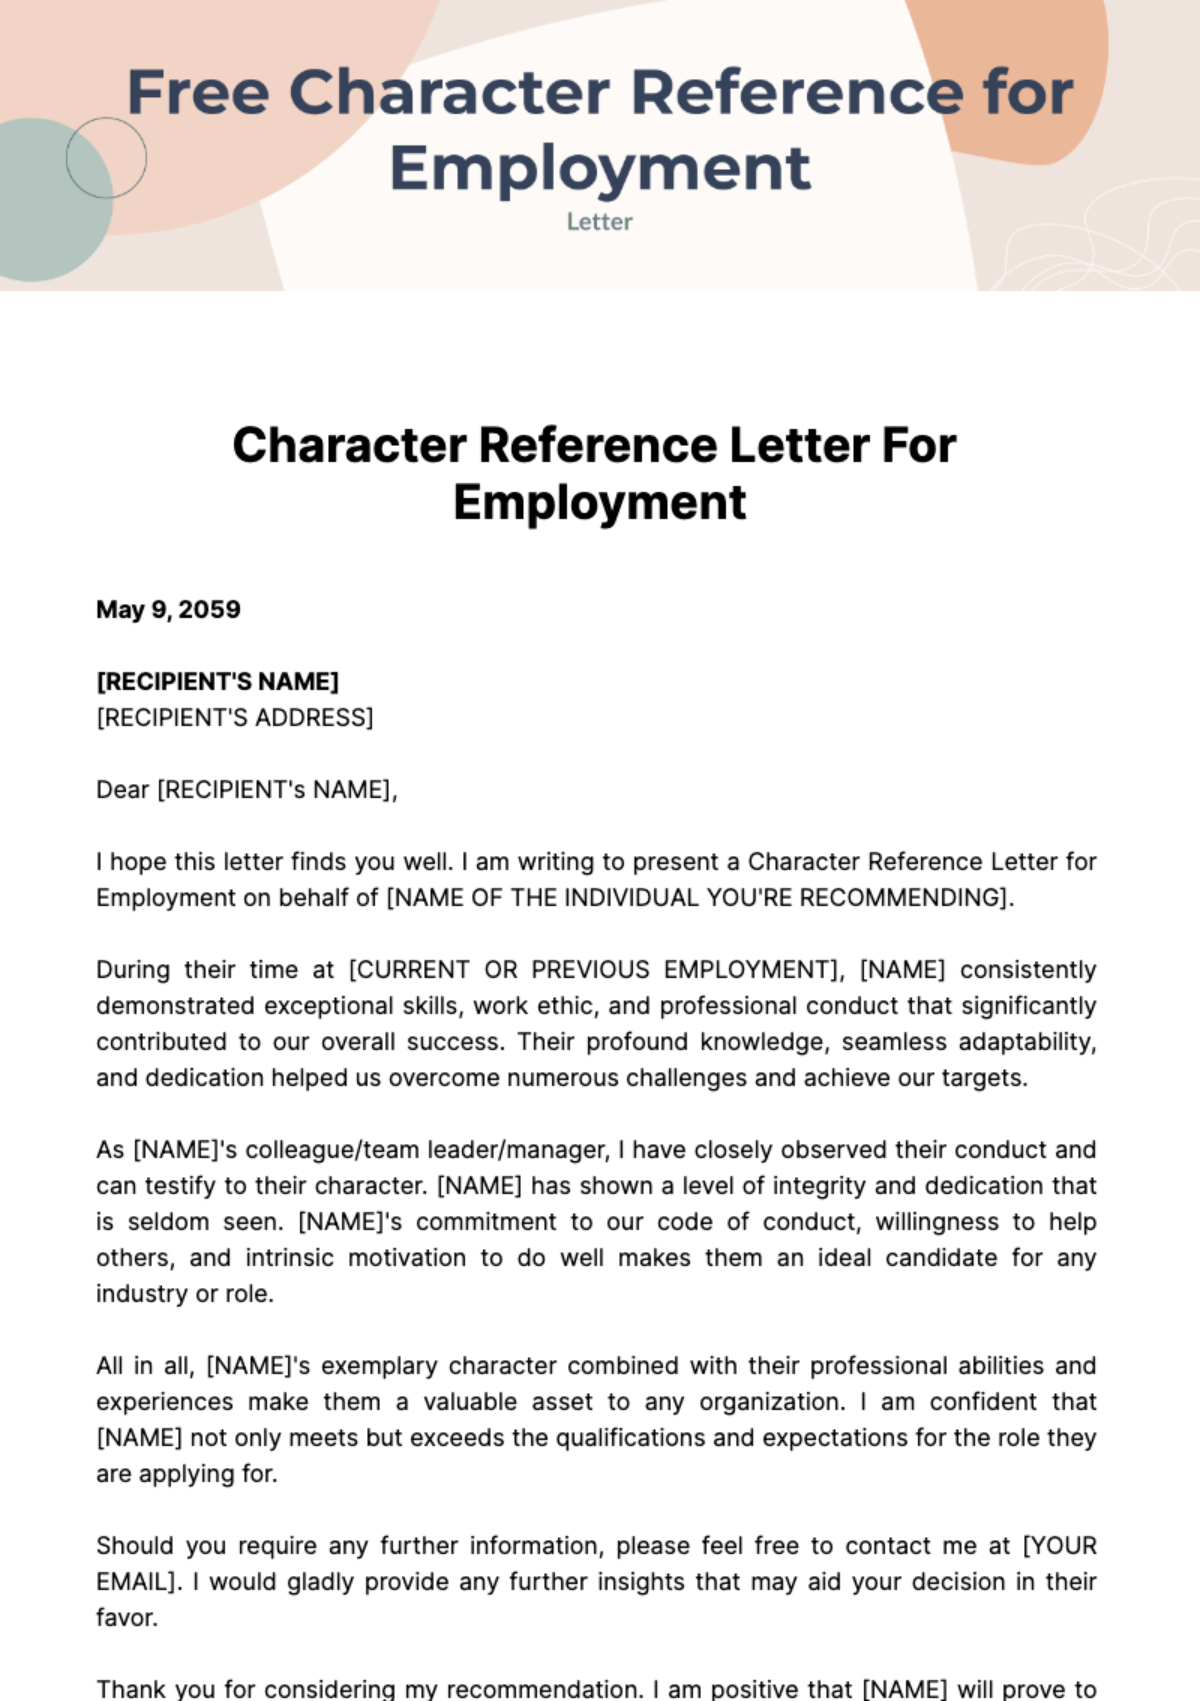 Free Character Reference Letter for Employment Template